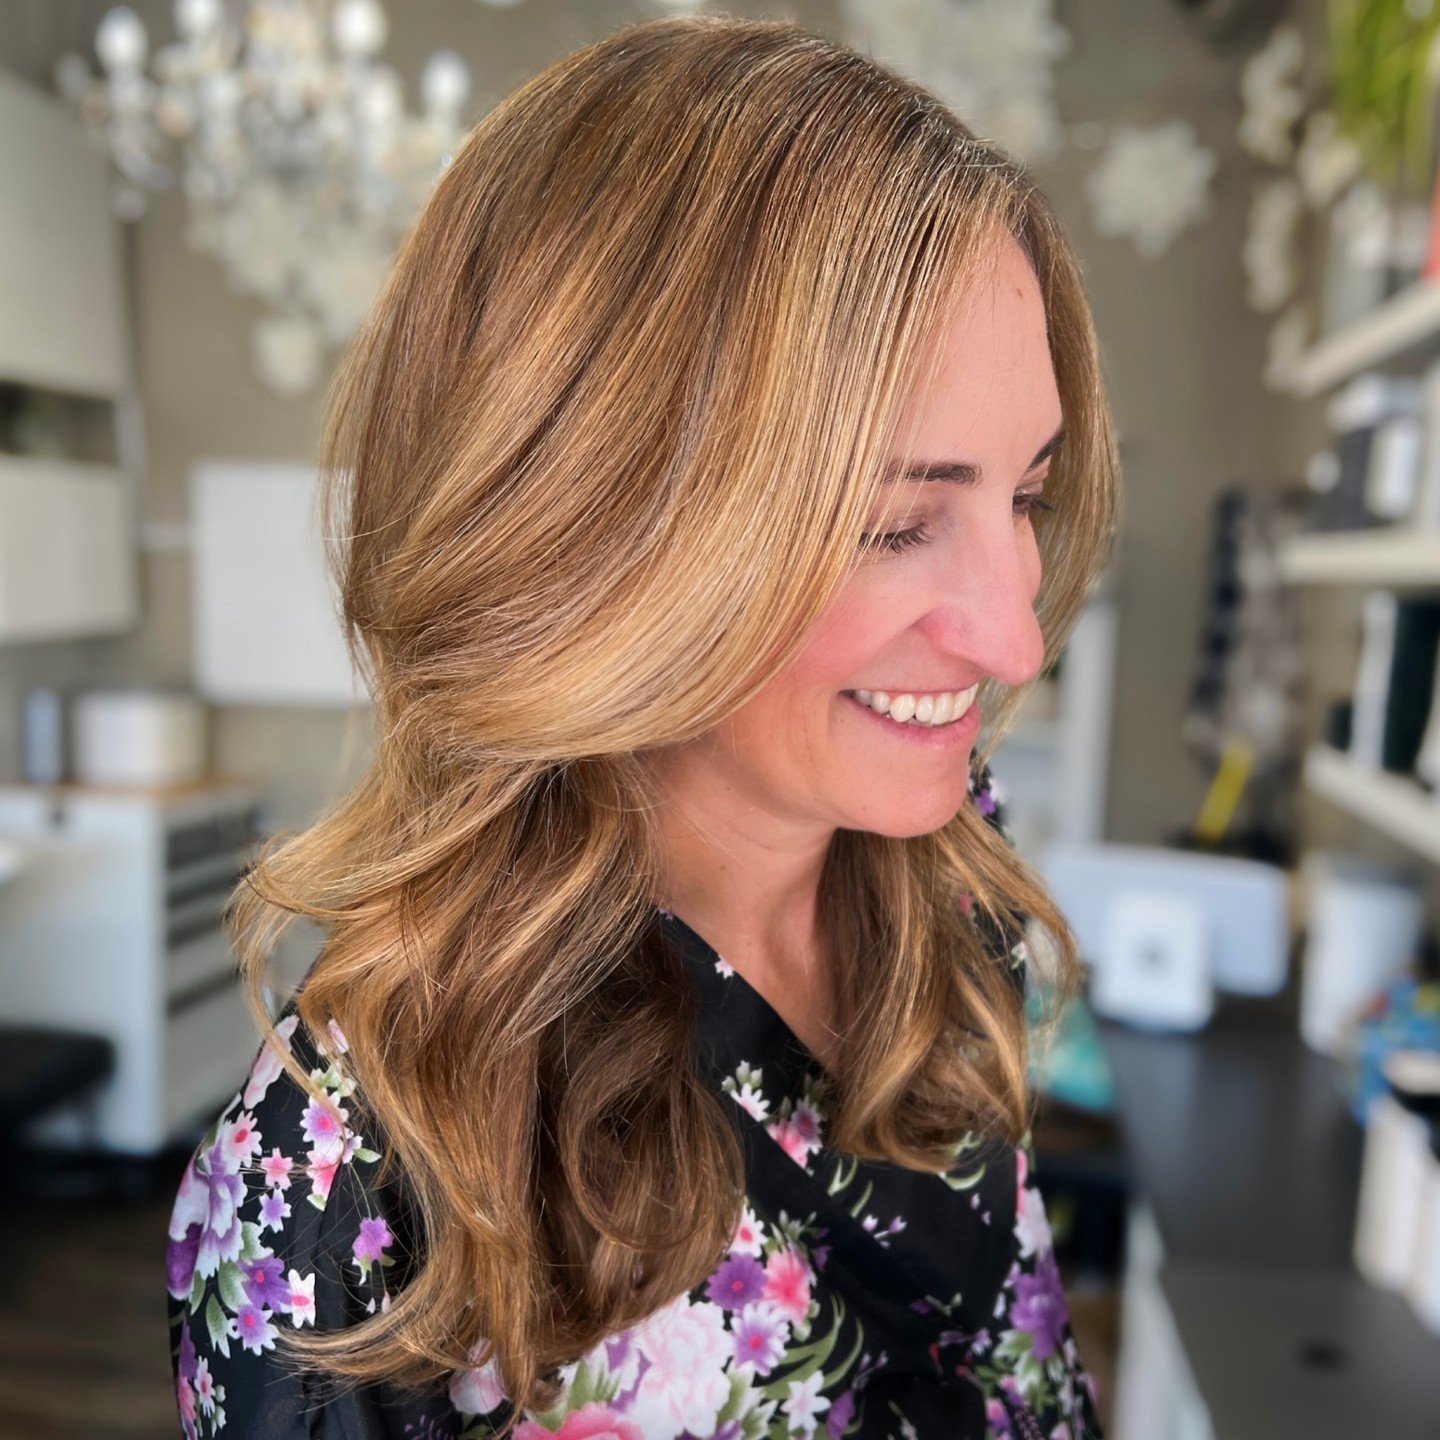 Did you know there&rsquo;s a way to highlight your hair without using lightener (aka bleach)? 🤯

Depending on the history of your hair and desired outcome, bleach free highlights may be an option.  Highlights created with permanent color could be a 